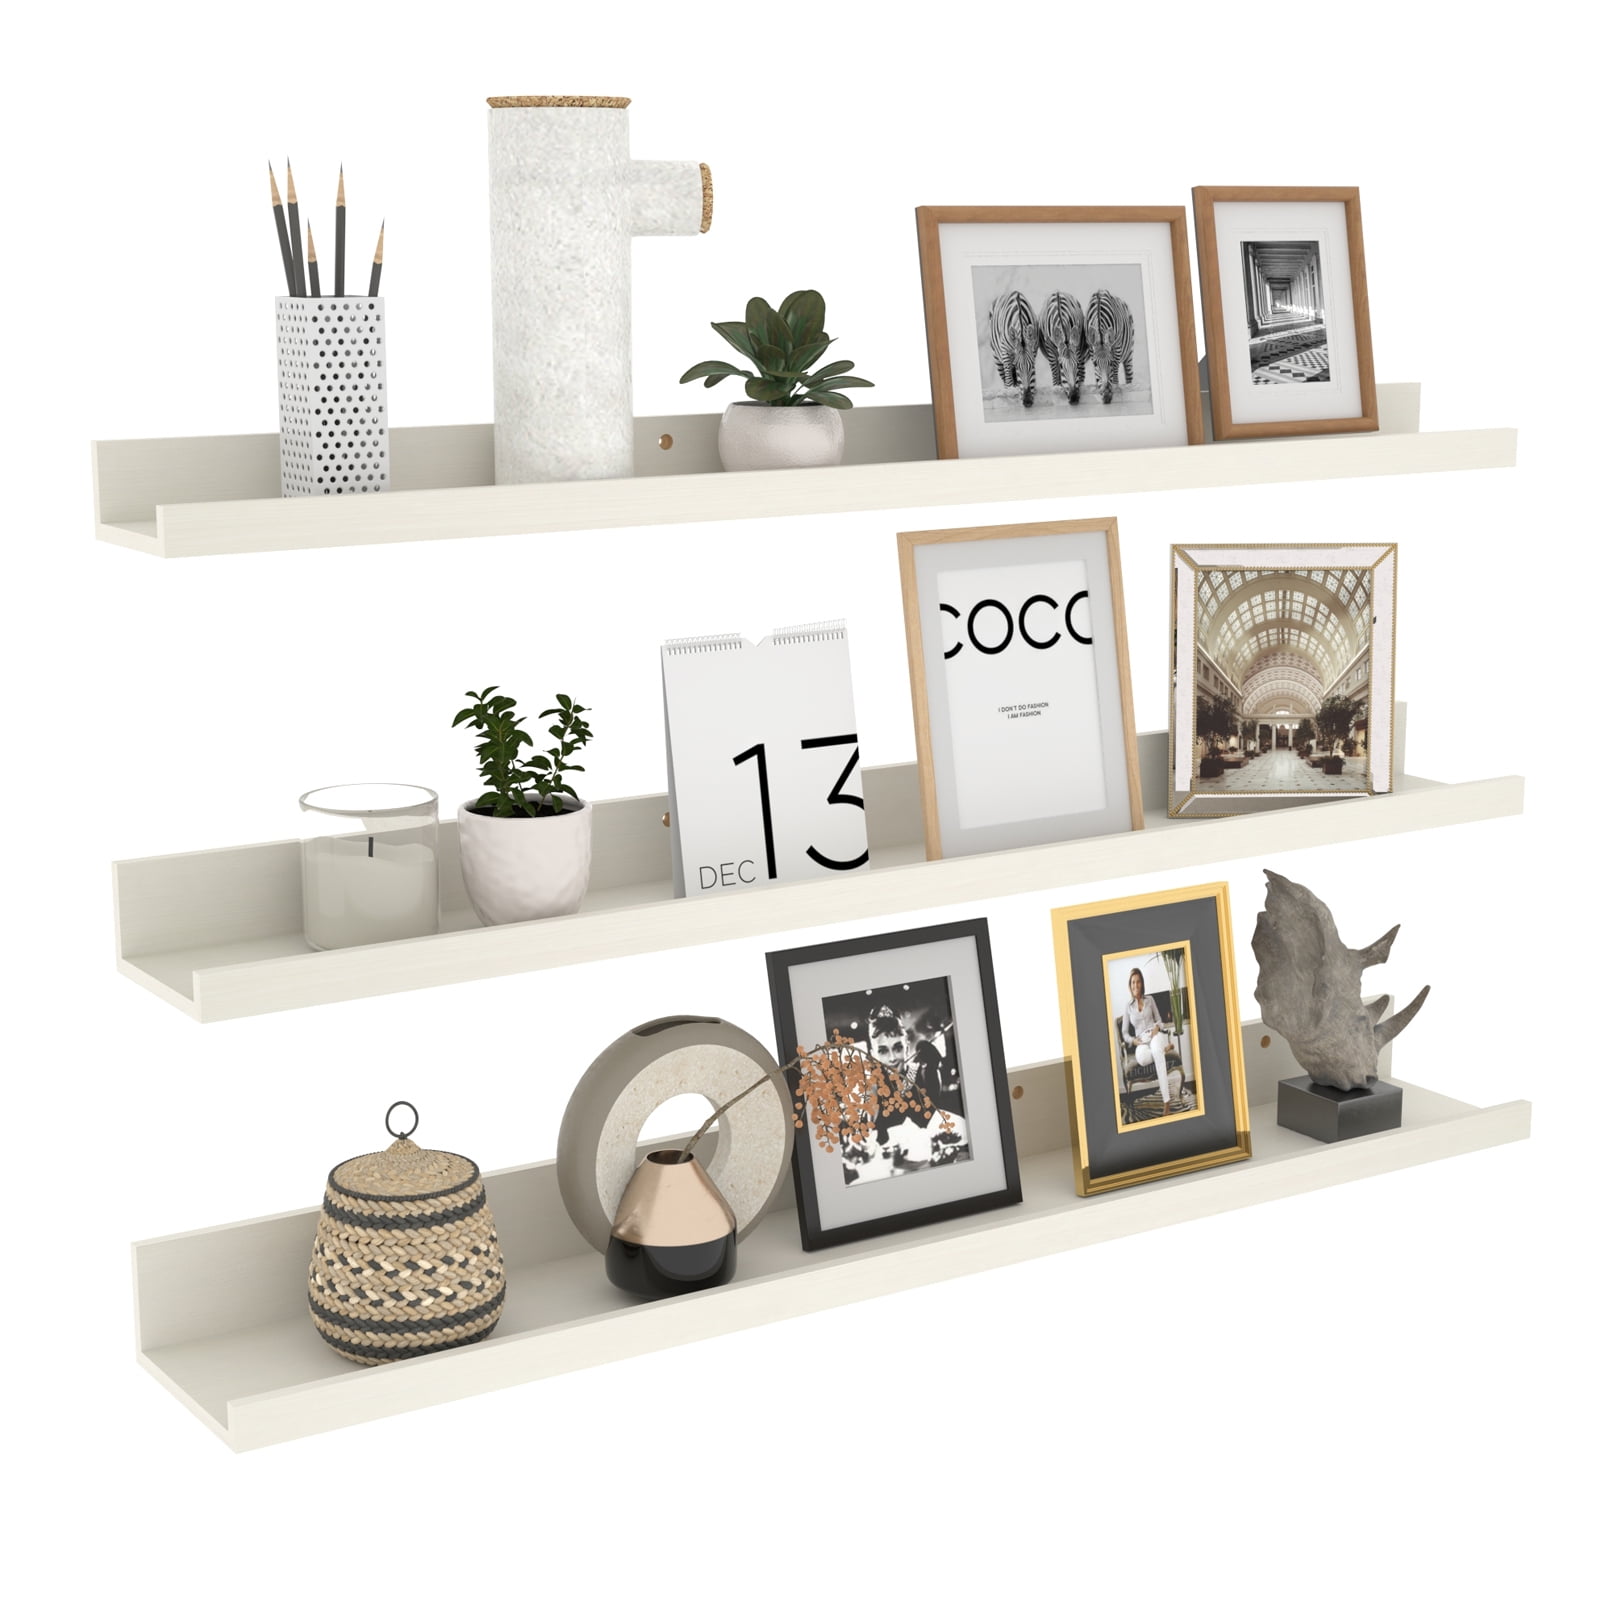 36 Inch Floating Wall Shelves Creamy